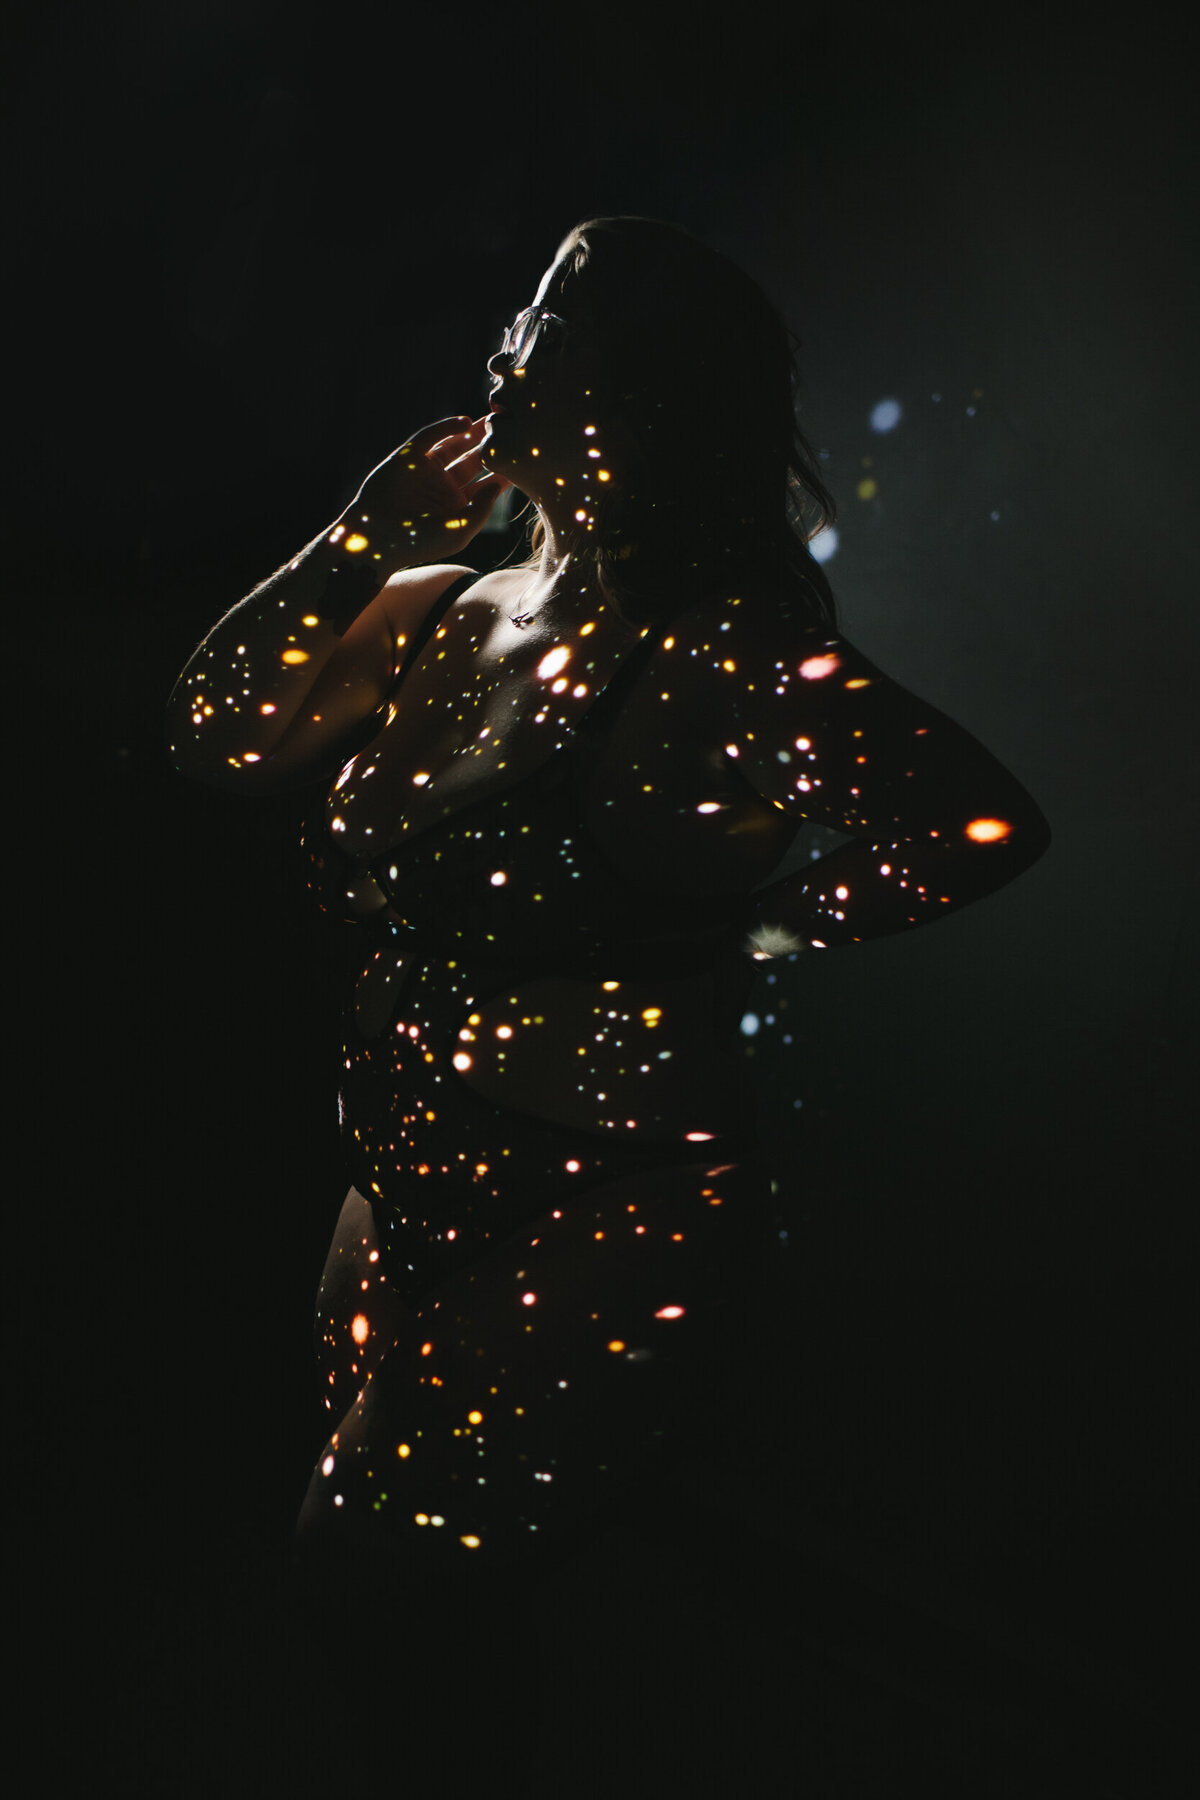 Artistic darkly lit portrait of the silhouette of a woman covered in lights